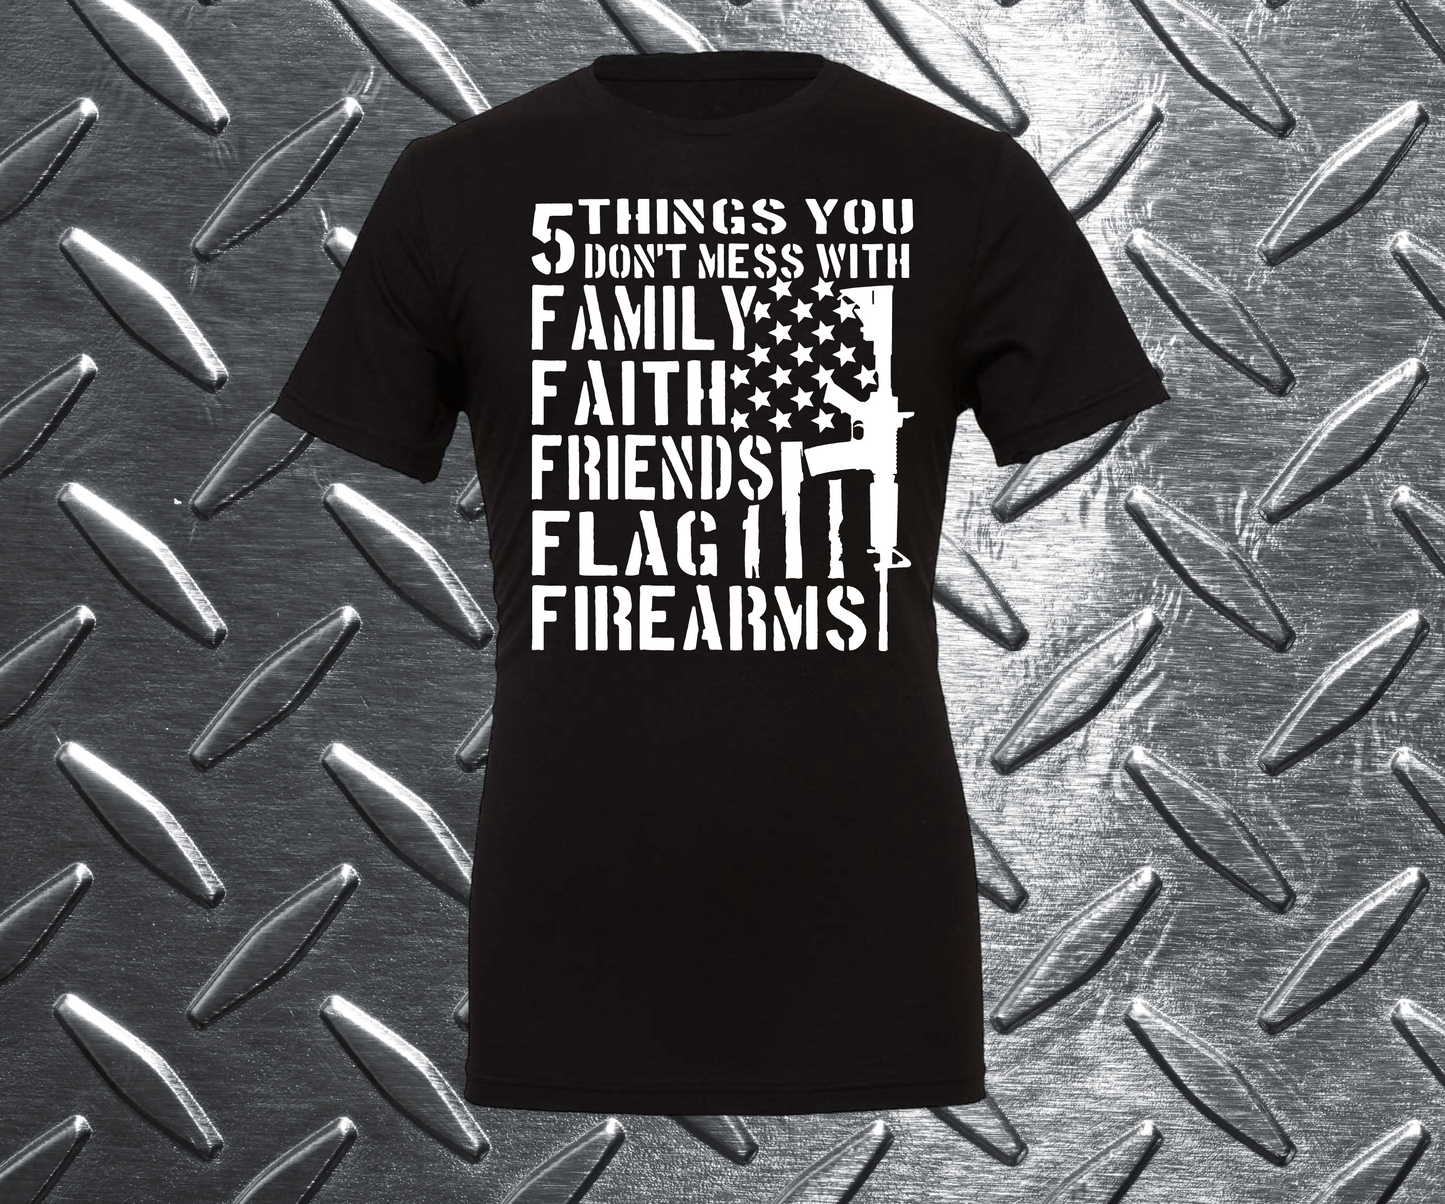 5 Things You Don't Mess With-FAMILY FAITH  FRIENDS  FLAG  FIREARMS Unisex Graphic Tee